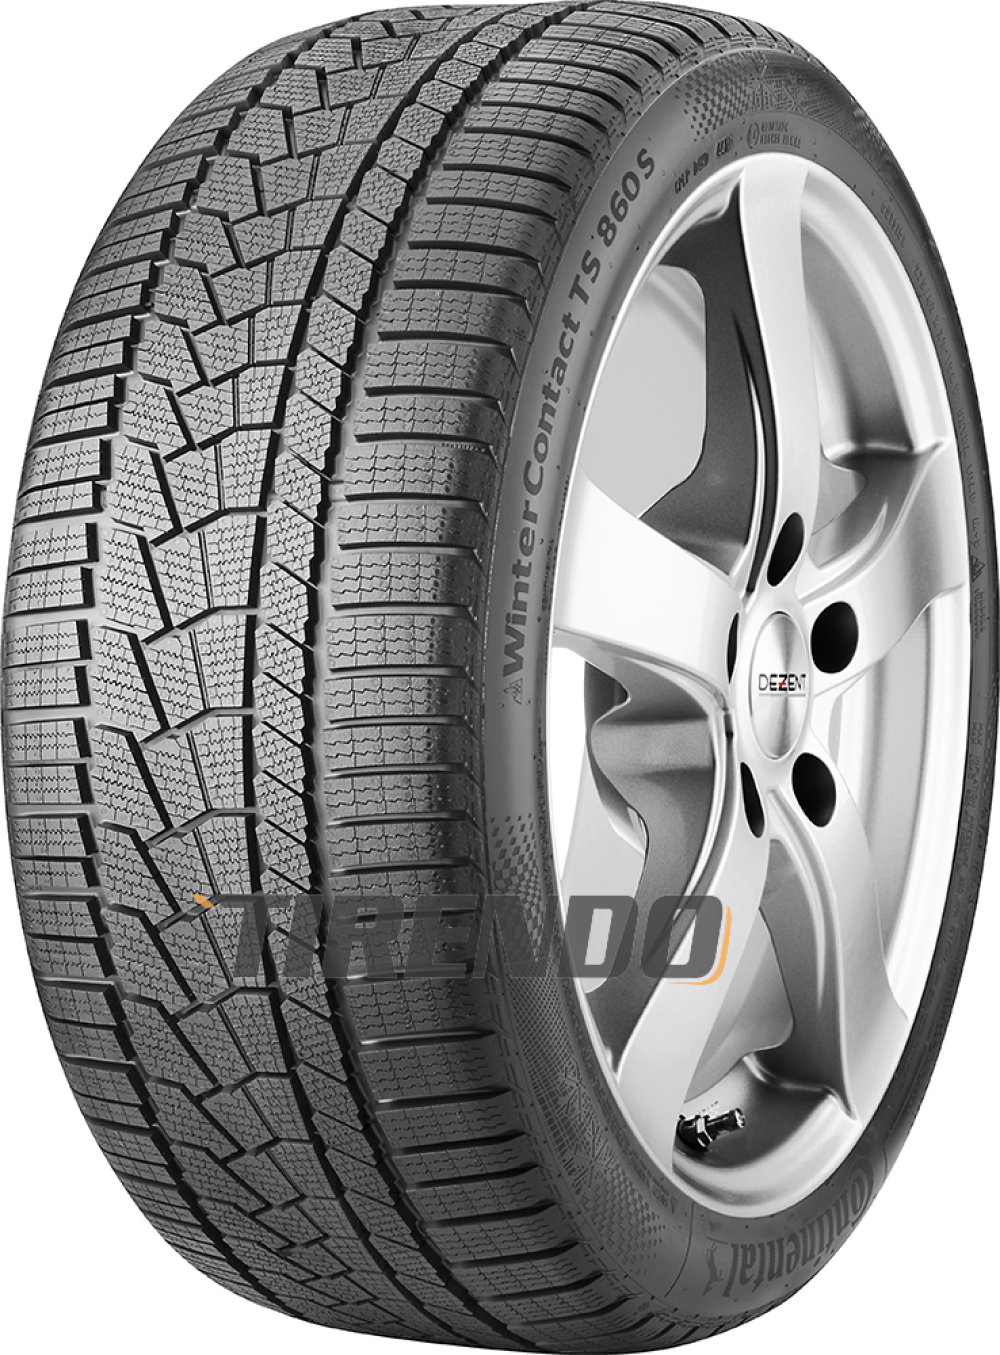 Image of Continental WinterContact TS 860 S ( 295/40 R20 110W XL EVc, MGT, SUV )